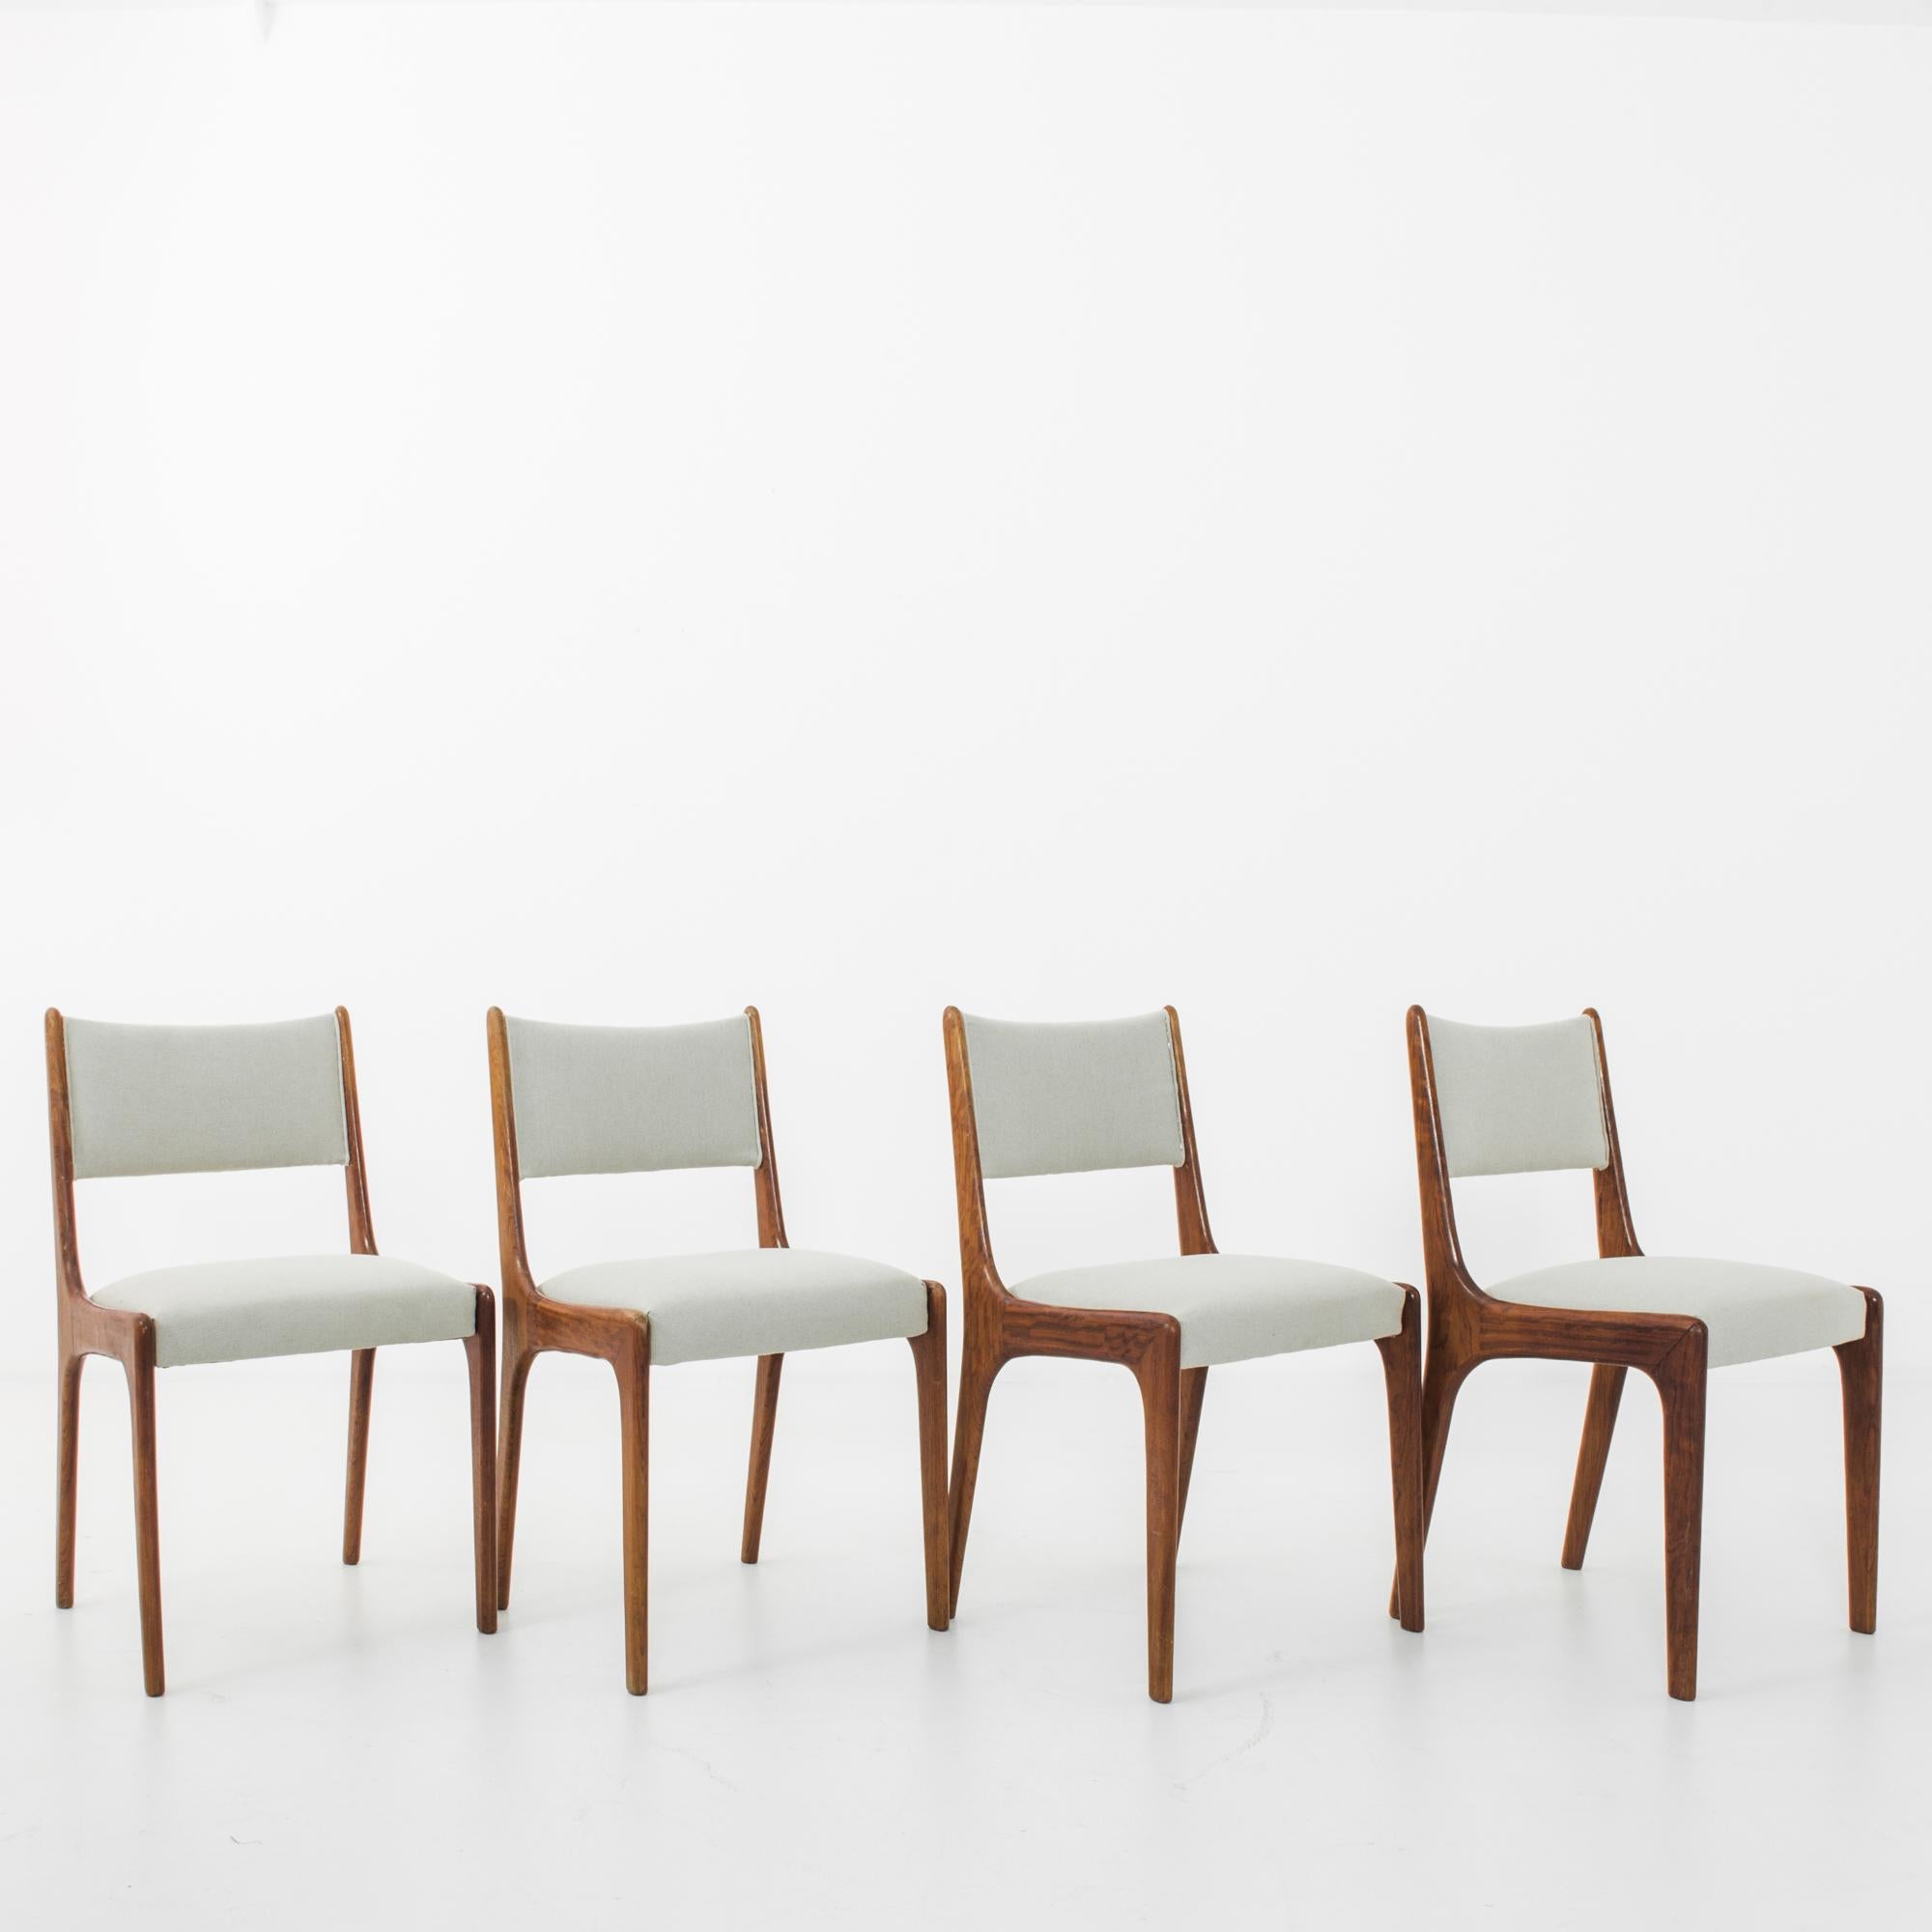 A teak dining chair set in characteristic mid-20th century Danish style. Simple forms combine dynamically, at angles with reclining back and supportive legs. The re-upholstered seat hovers within the wooden frame, the warm polished teak